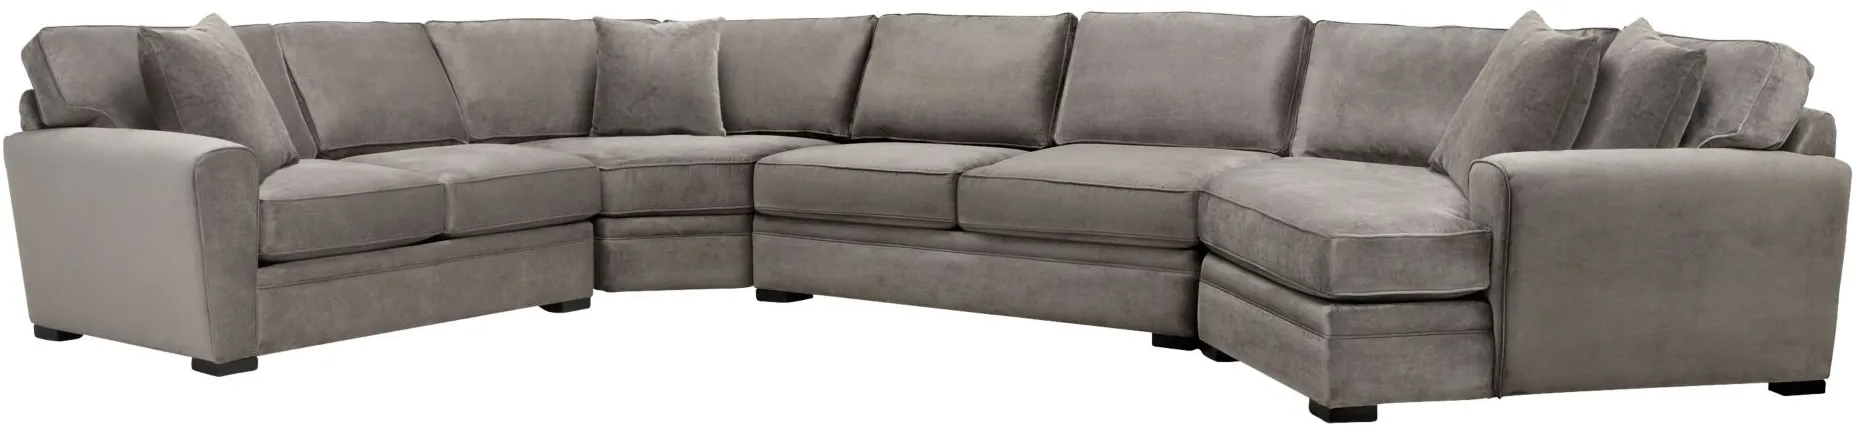 Artemis II 4-pc. Right Hand Facing Sectional Sofa in Vintage by Jonathan Louis